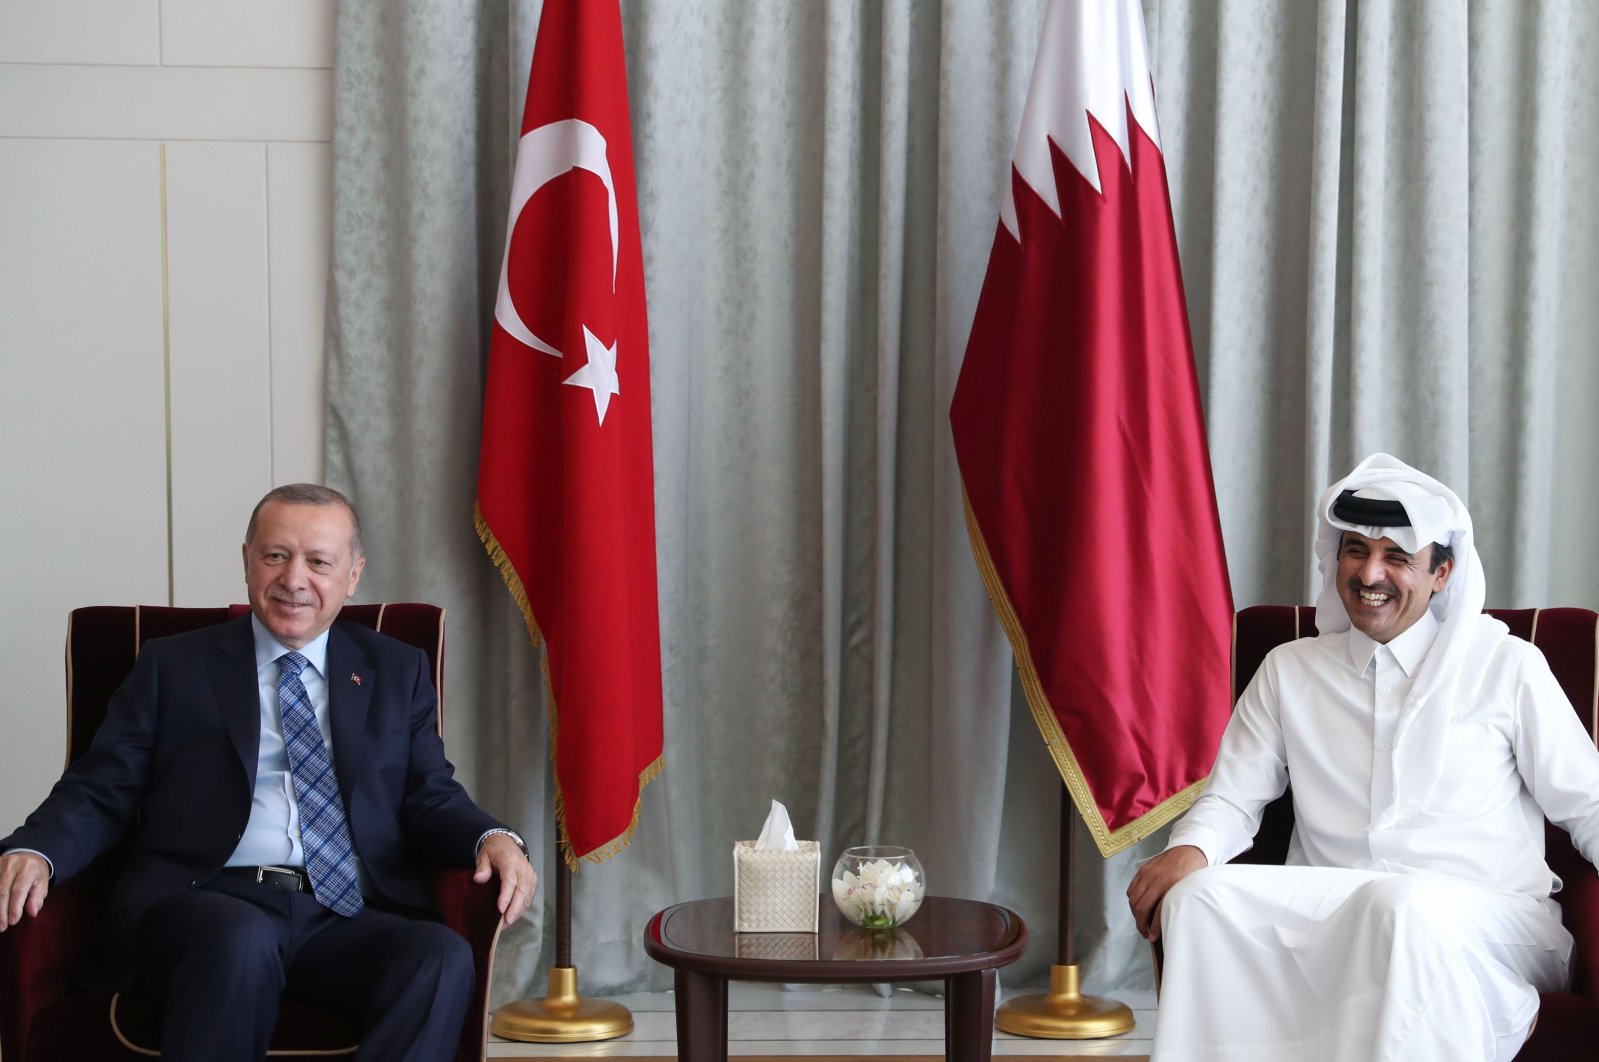 This handout picture provided by Qatar's Government Communications Office (GCO) on July 2, 2020 shows Emir Sheikh Tamim bin Hamad al-Thani (R) meeting with President Recep Tayyip Erdoğan in the capital Doha. (AFP Photo)